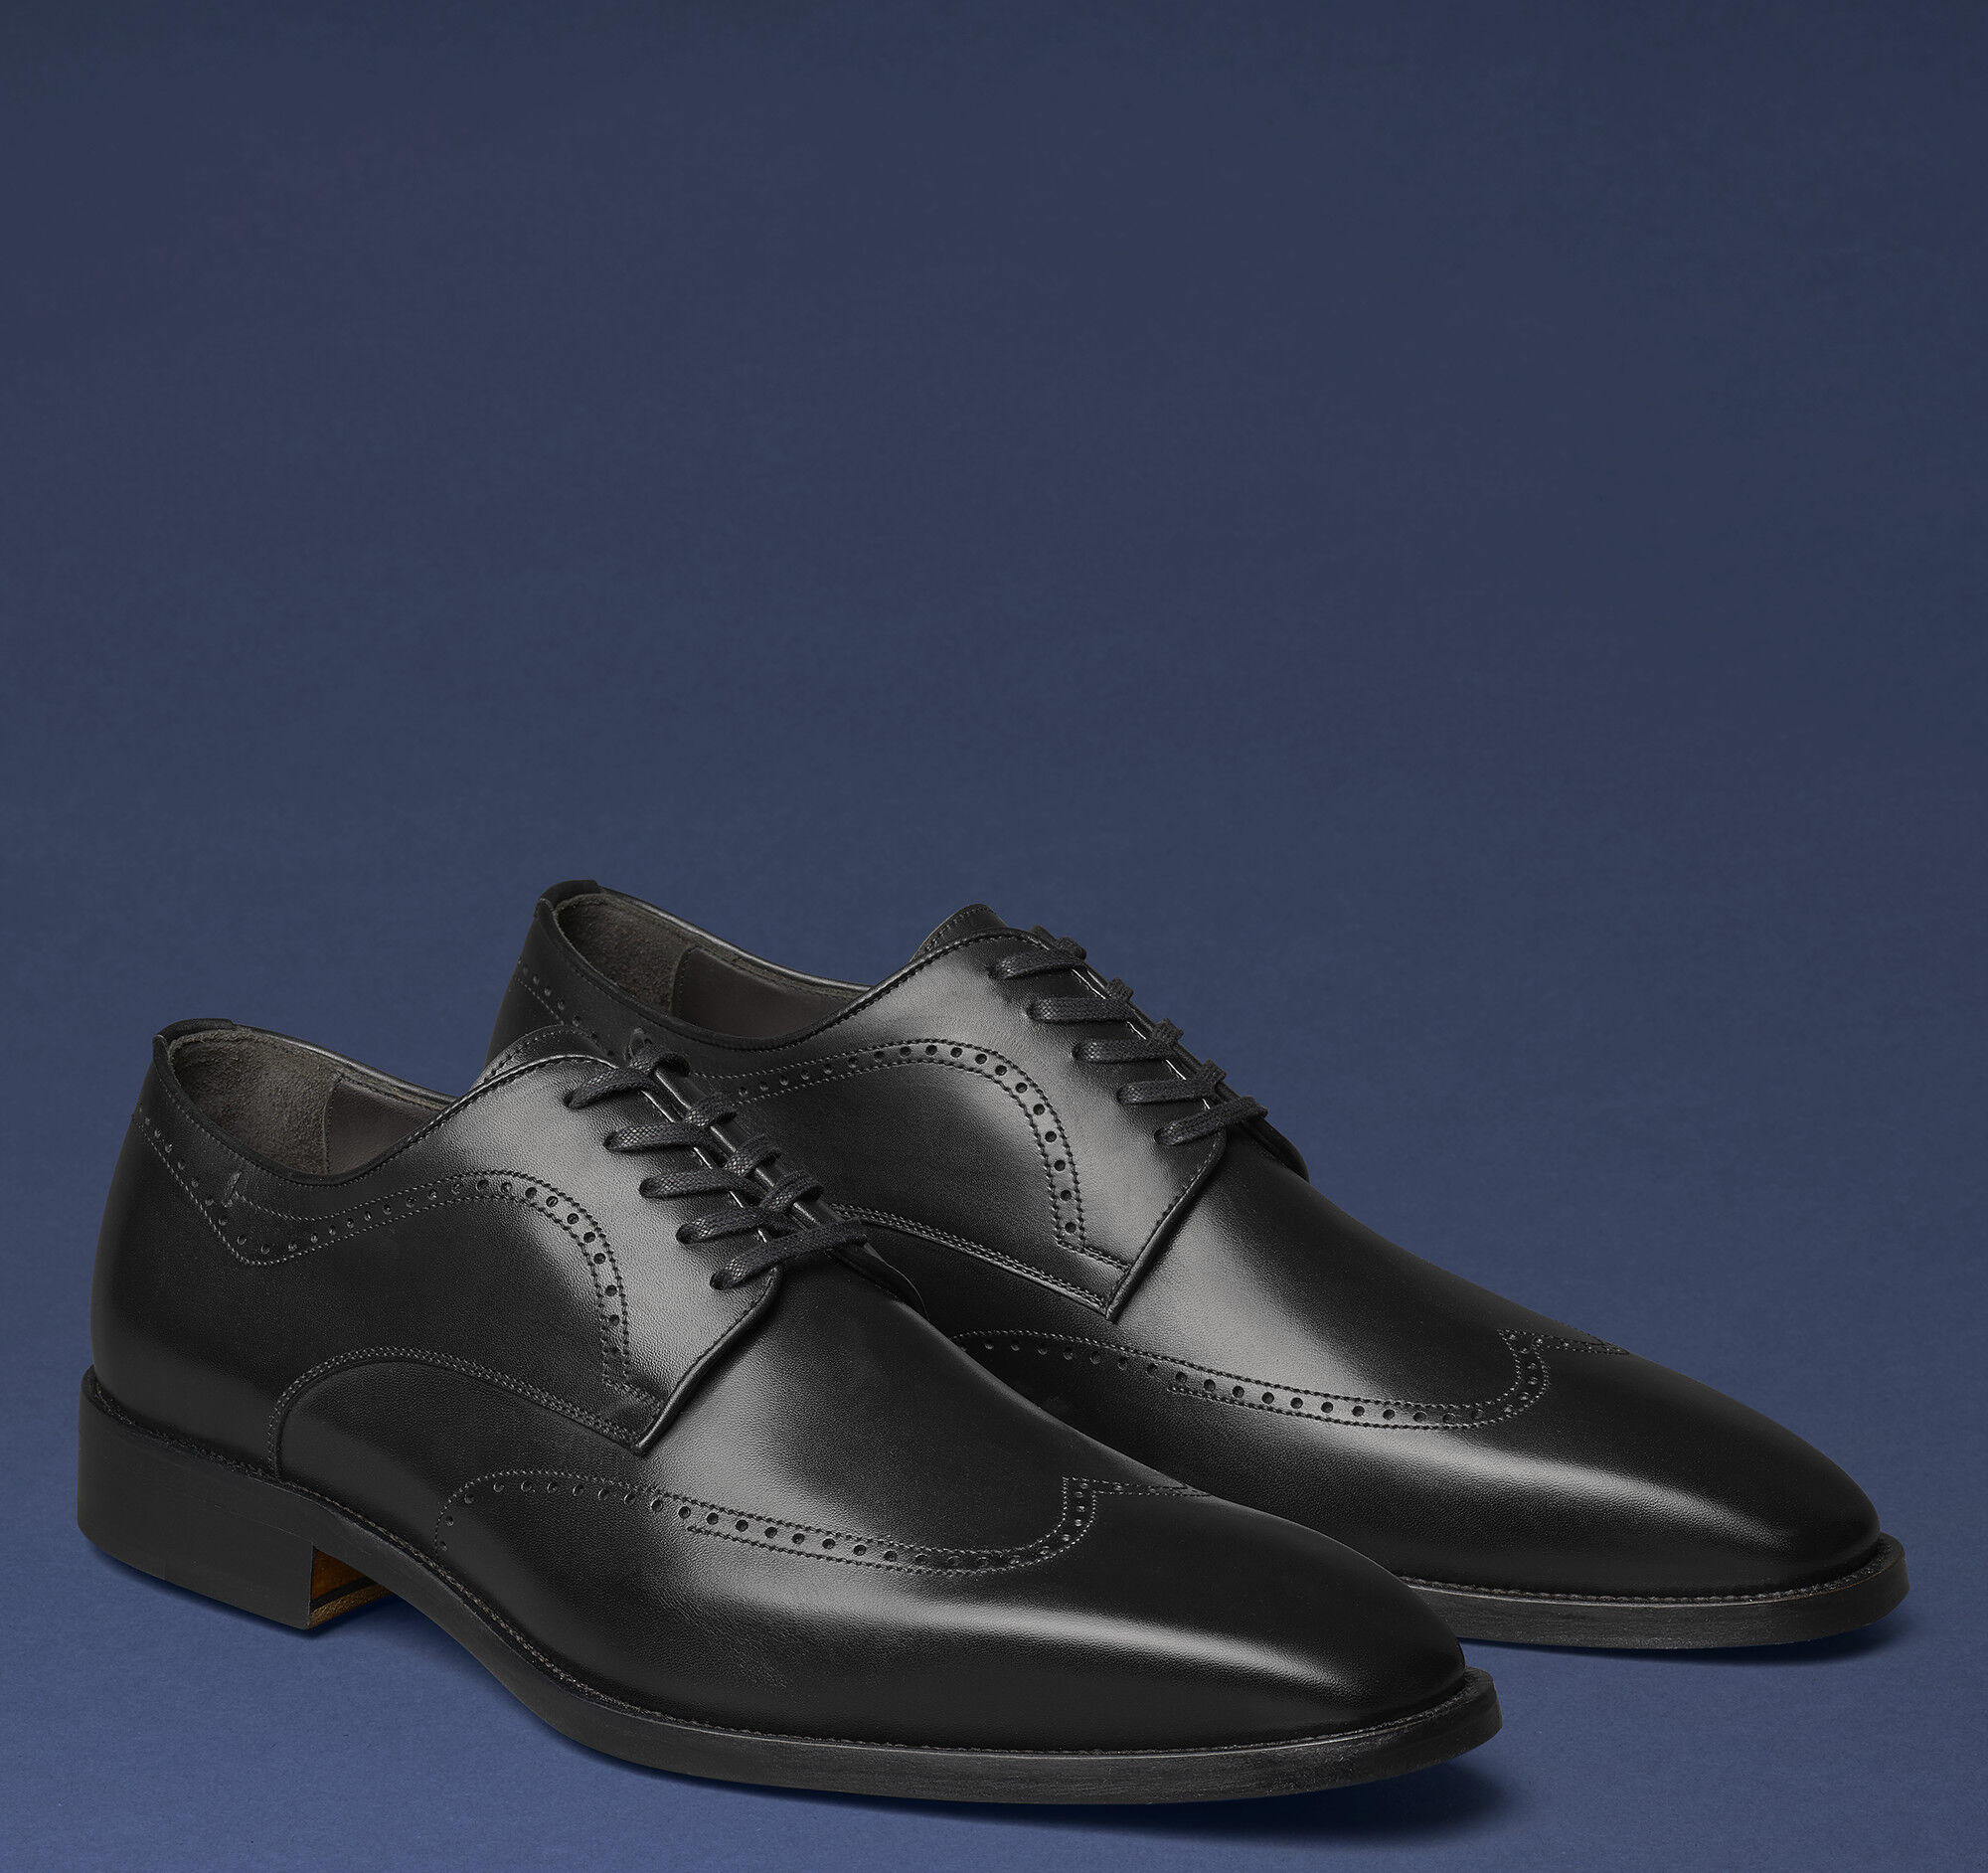 johnston murphy mens shoes clearance